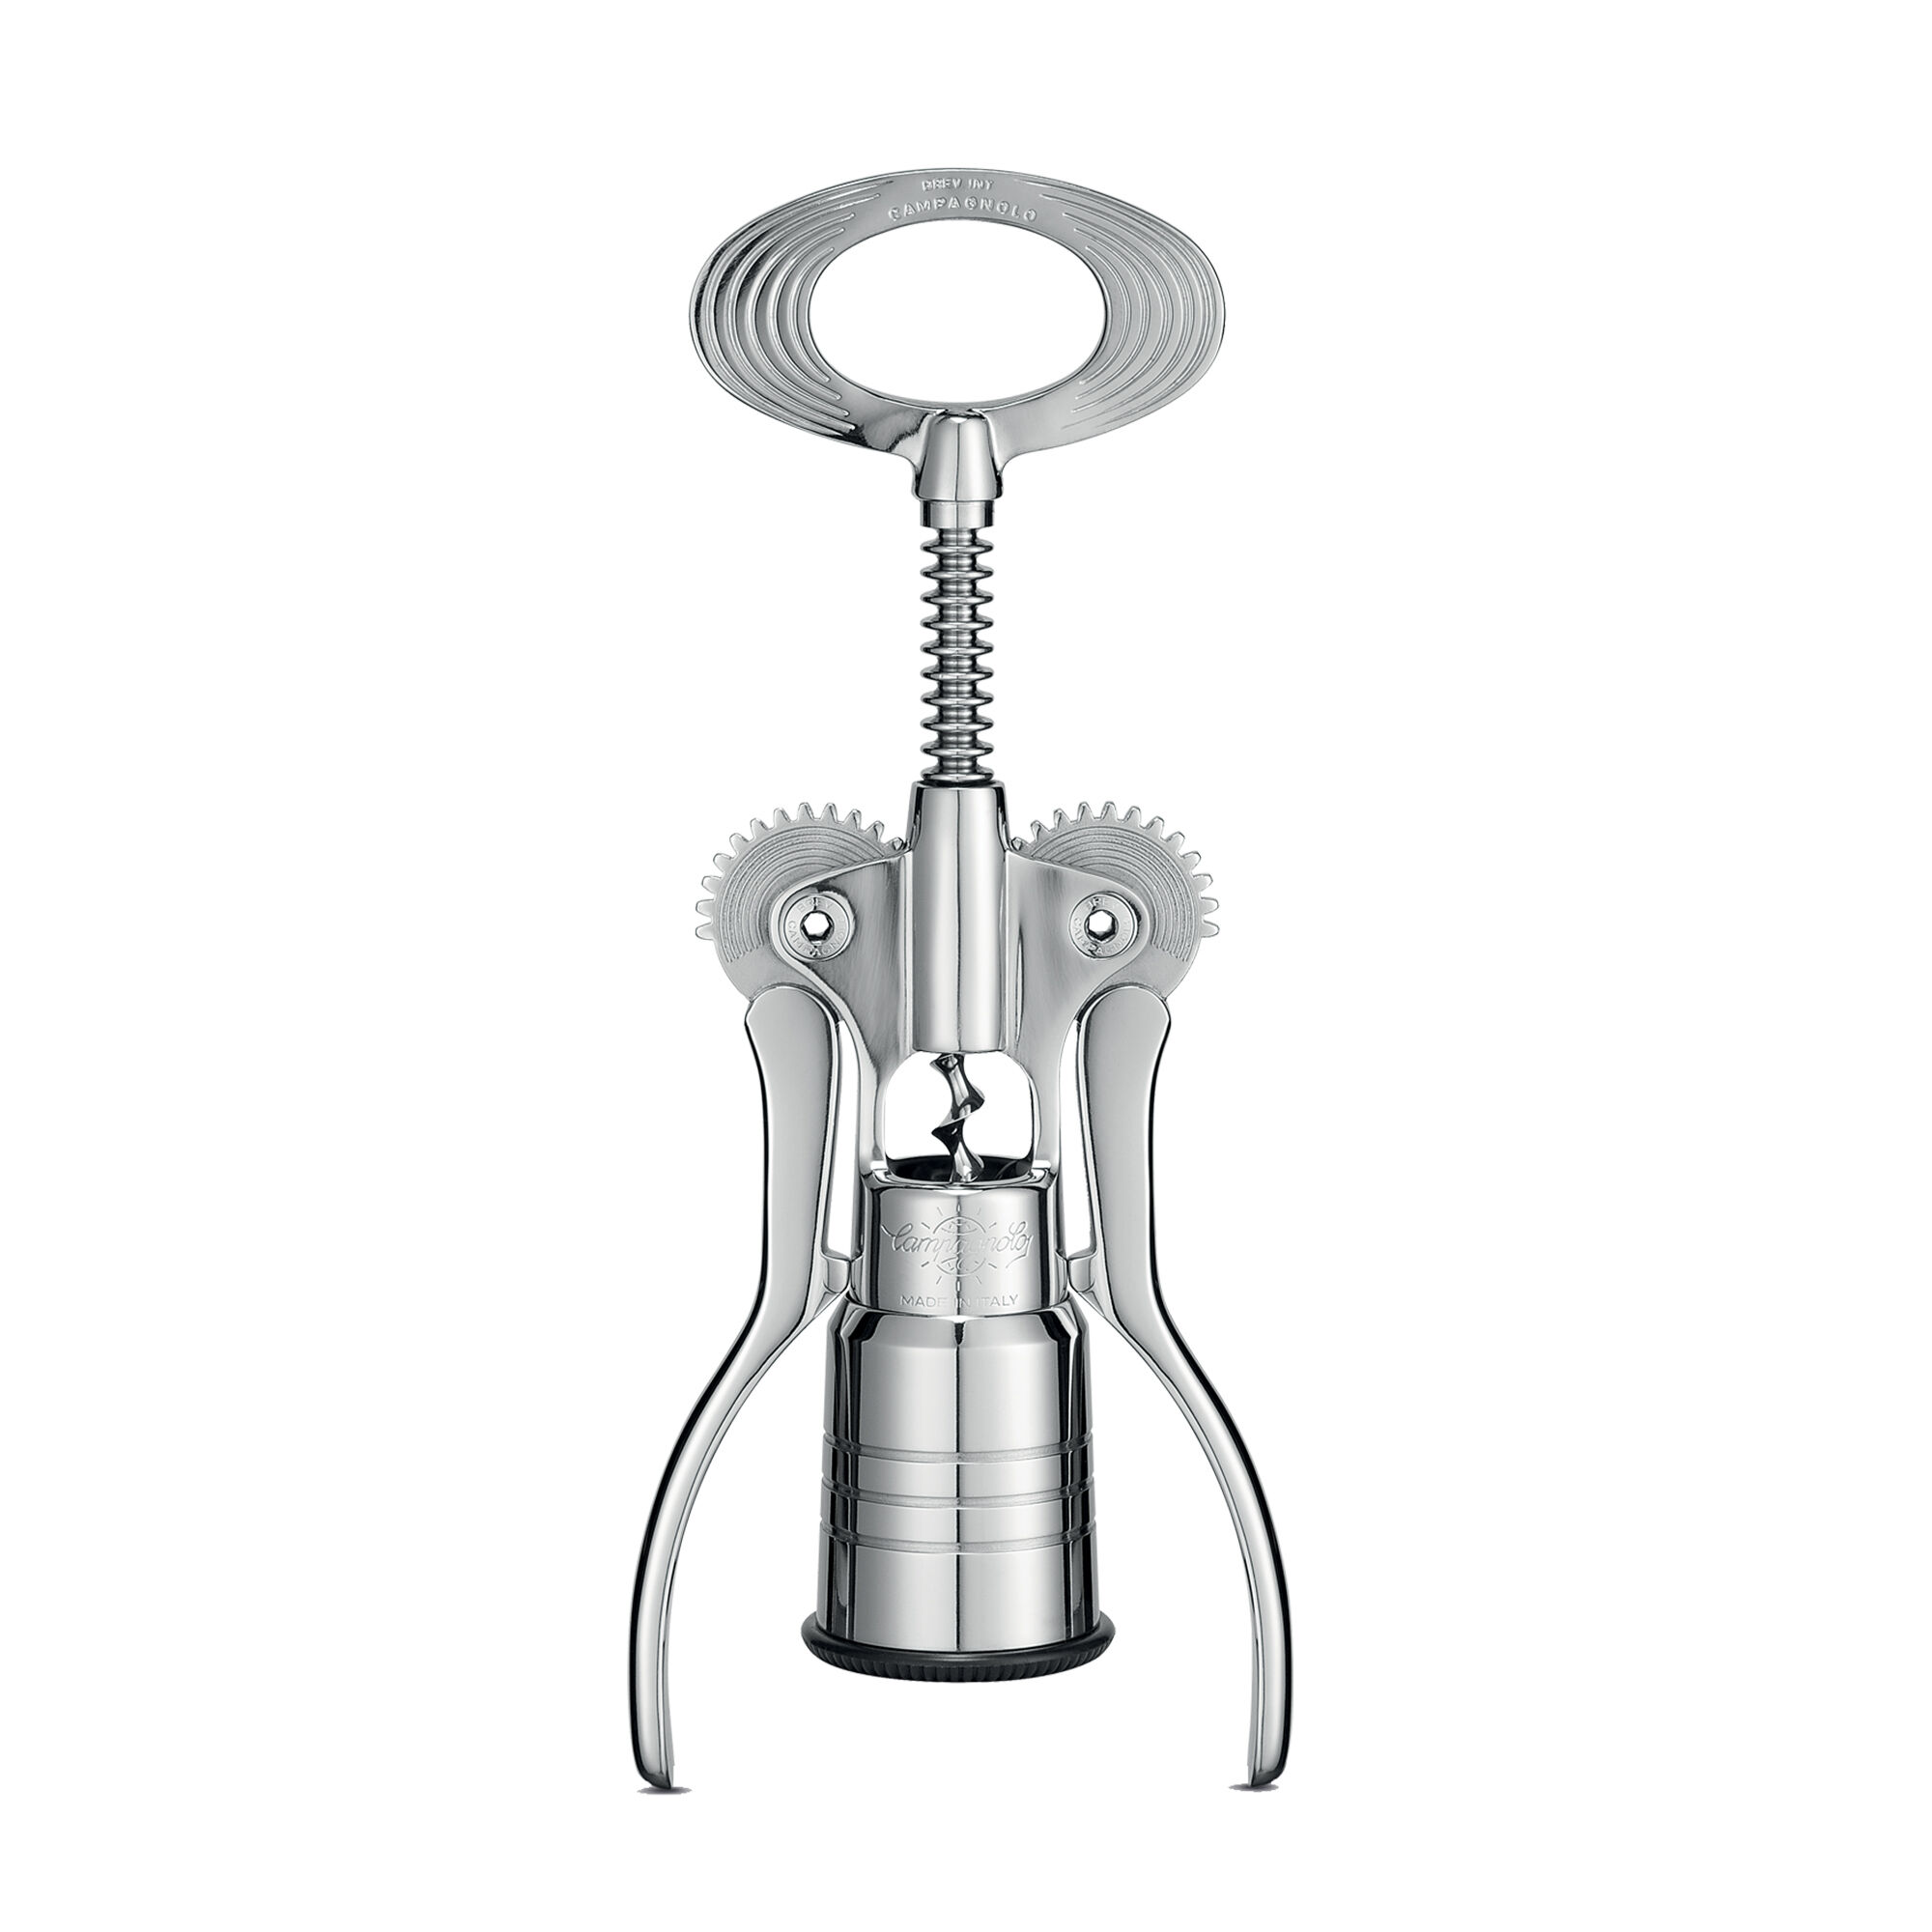 Big the Corkscrew Collection Items | Campagnolo